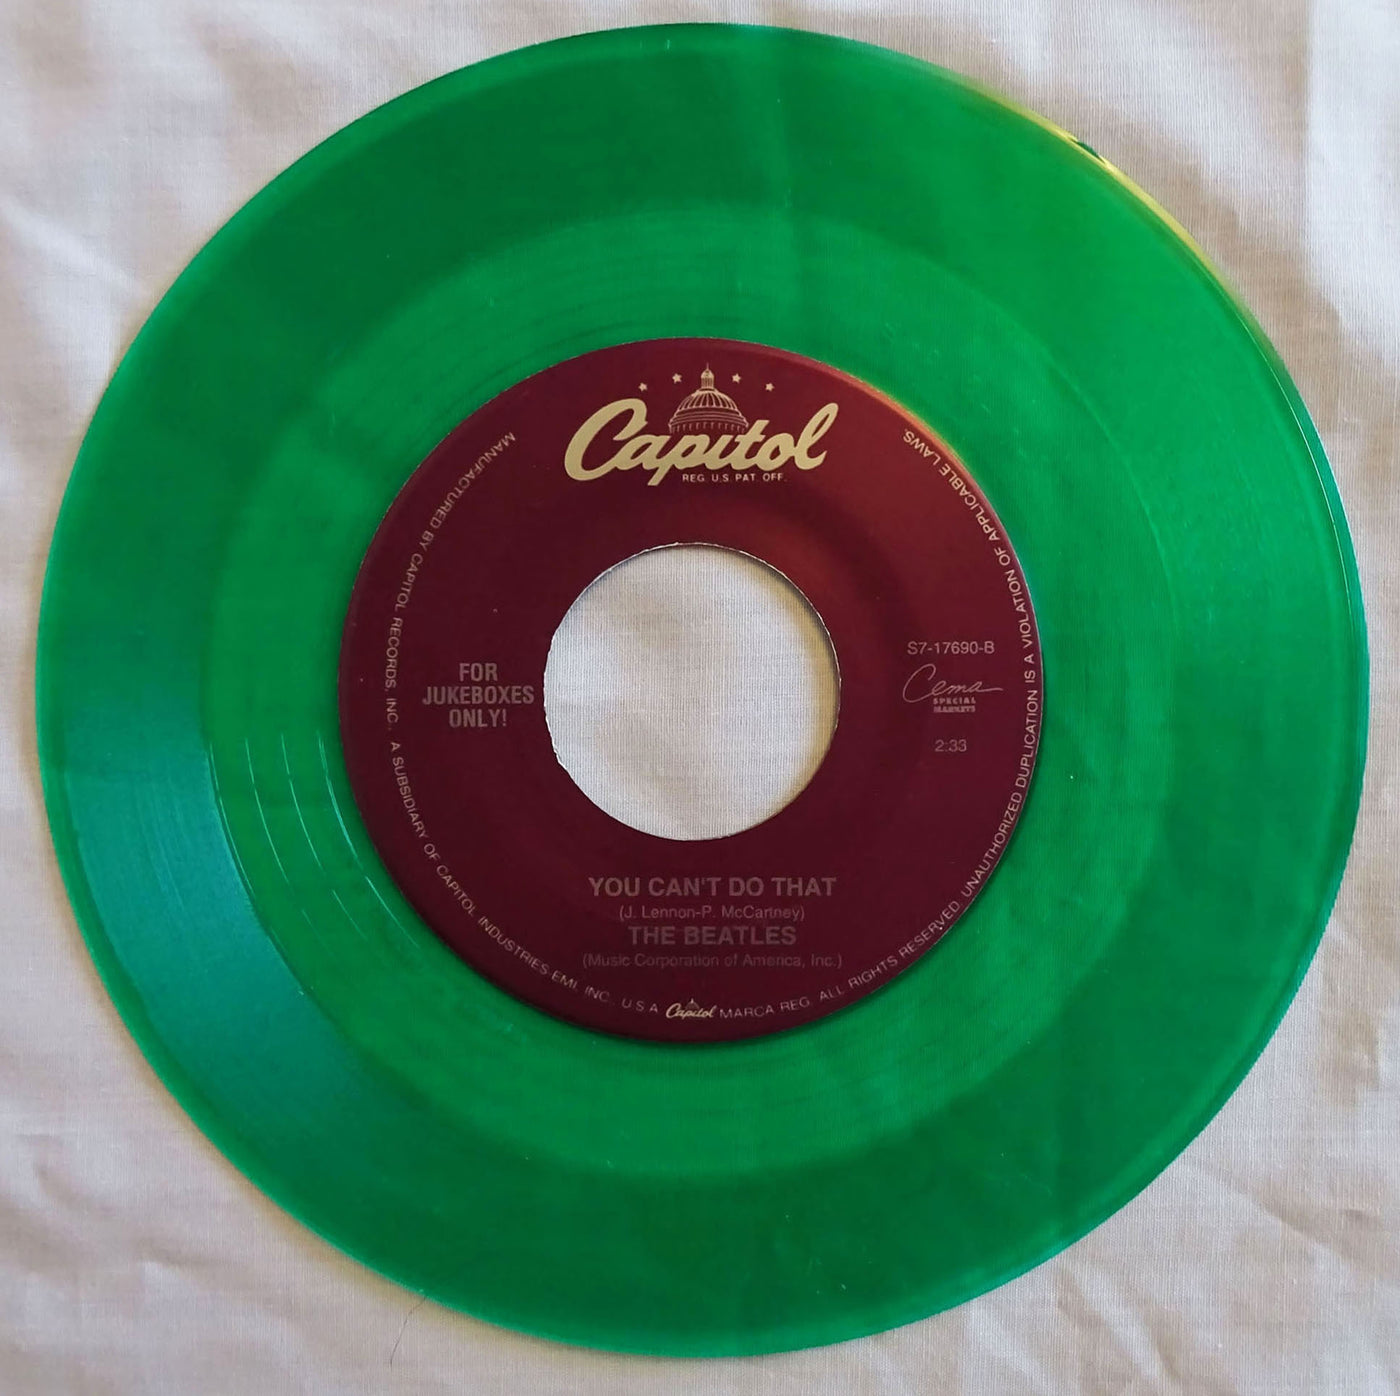 The Beatles Can't Buy Me Love-You Can't Do That Green Jukebox Vinyl Single 45rpm S7-17690